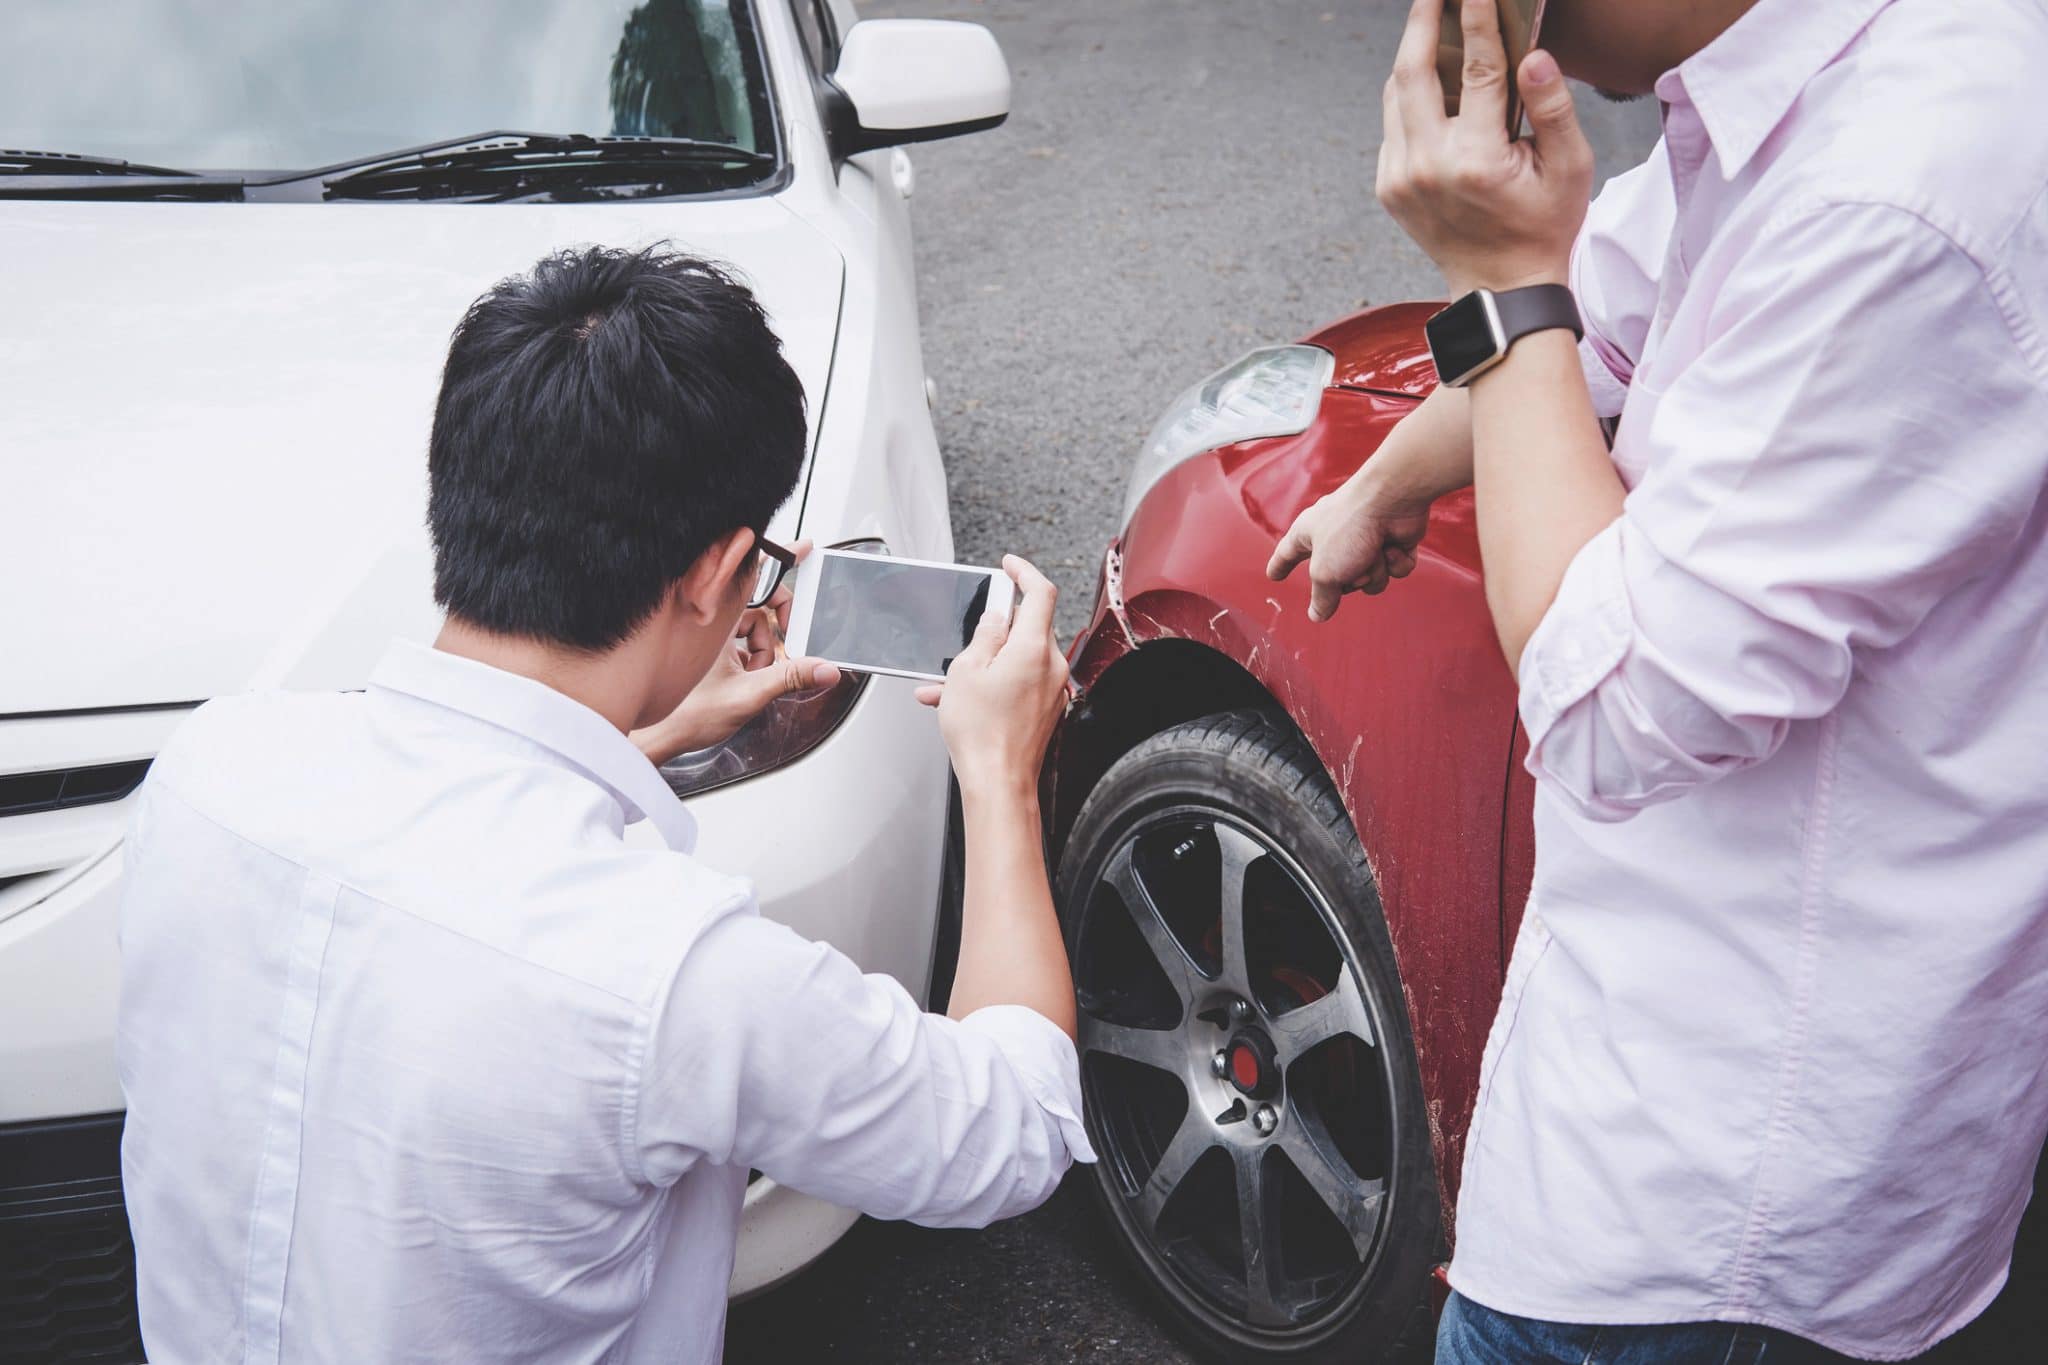 How to Deal With Insurance Adjusters After a Car Crash